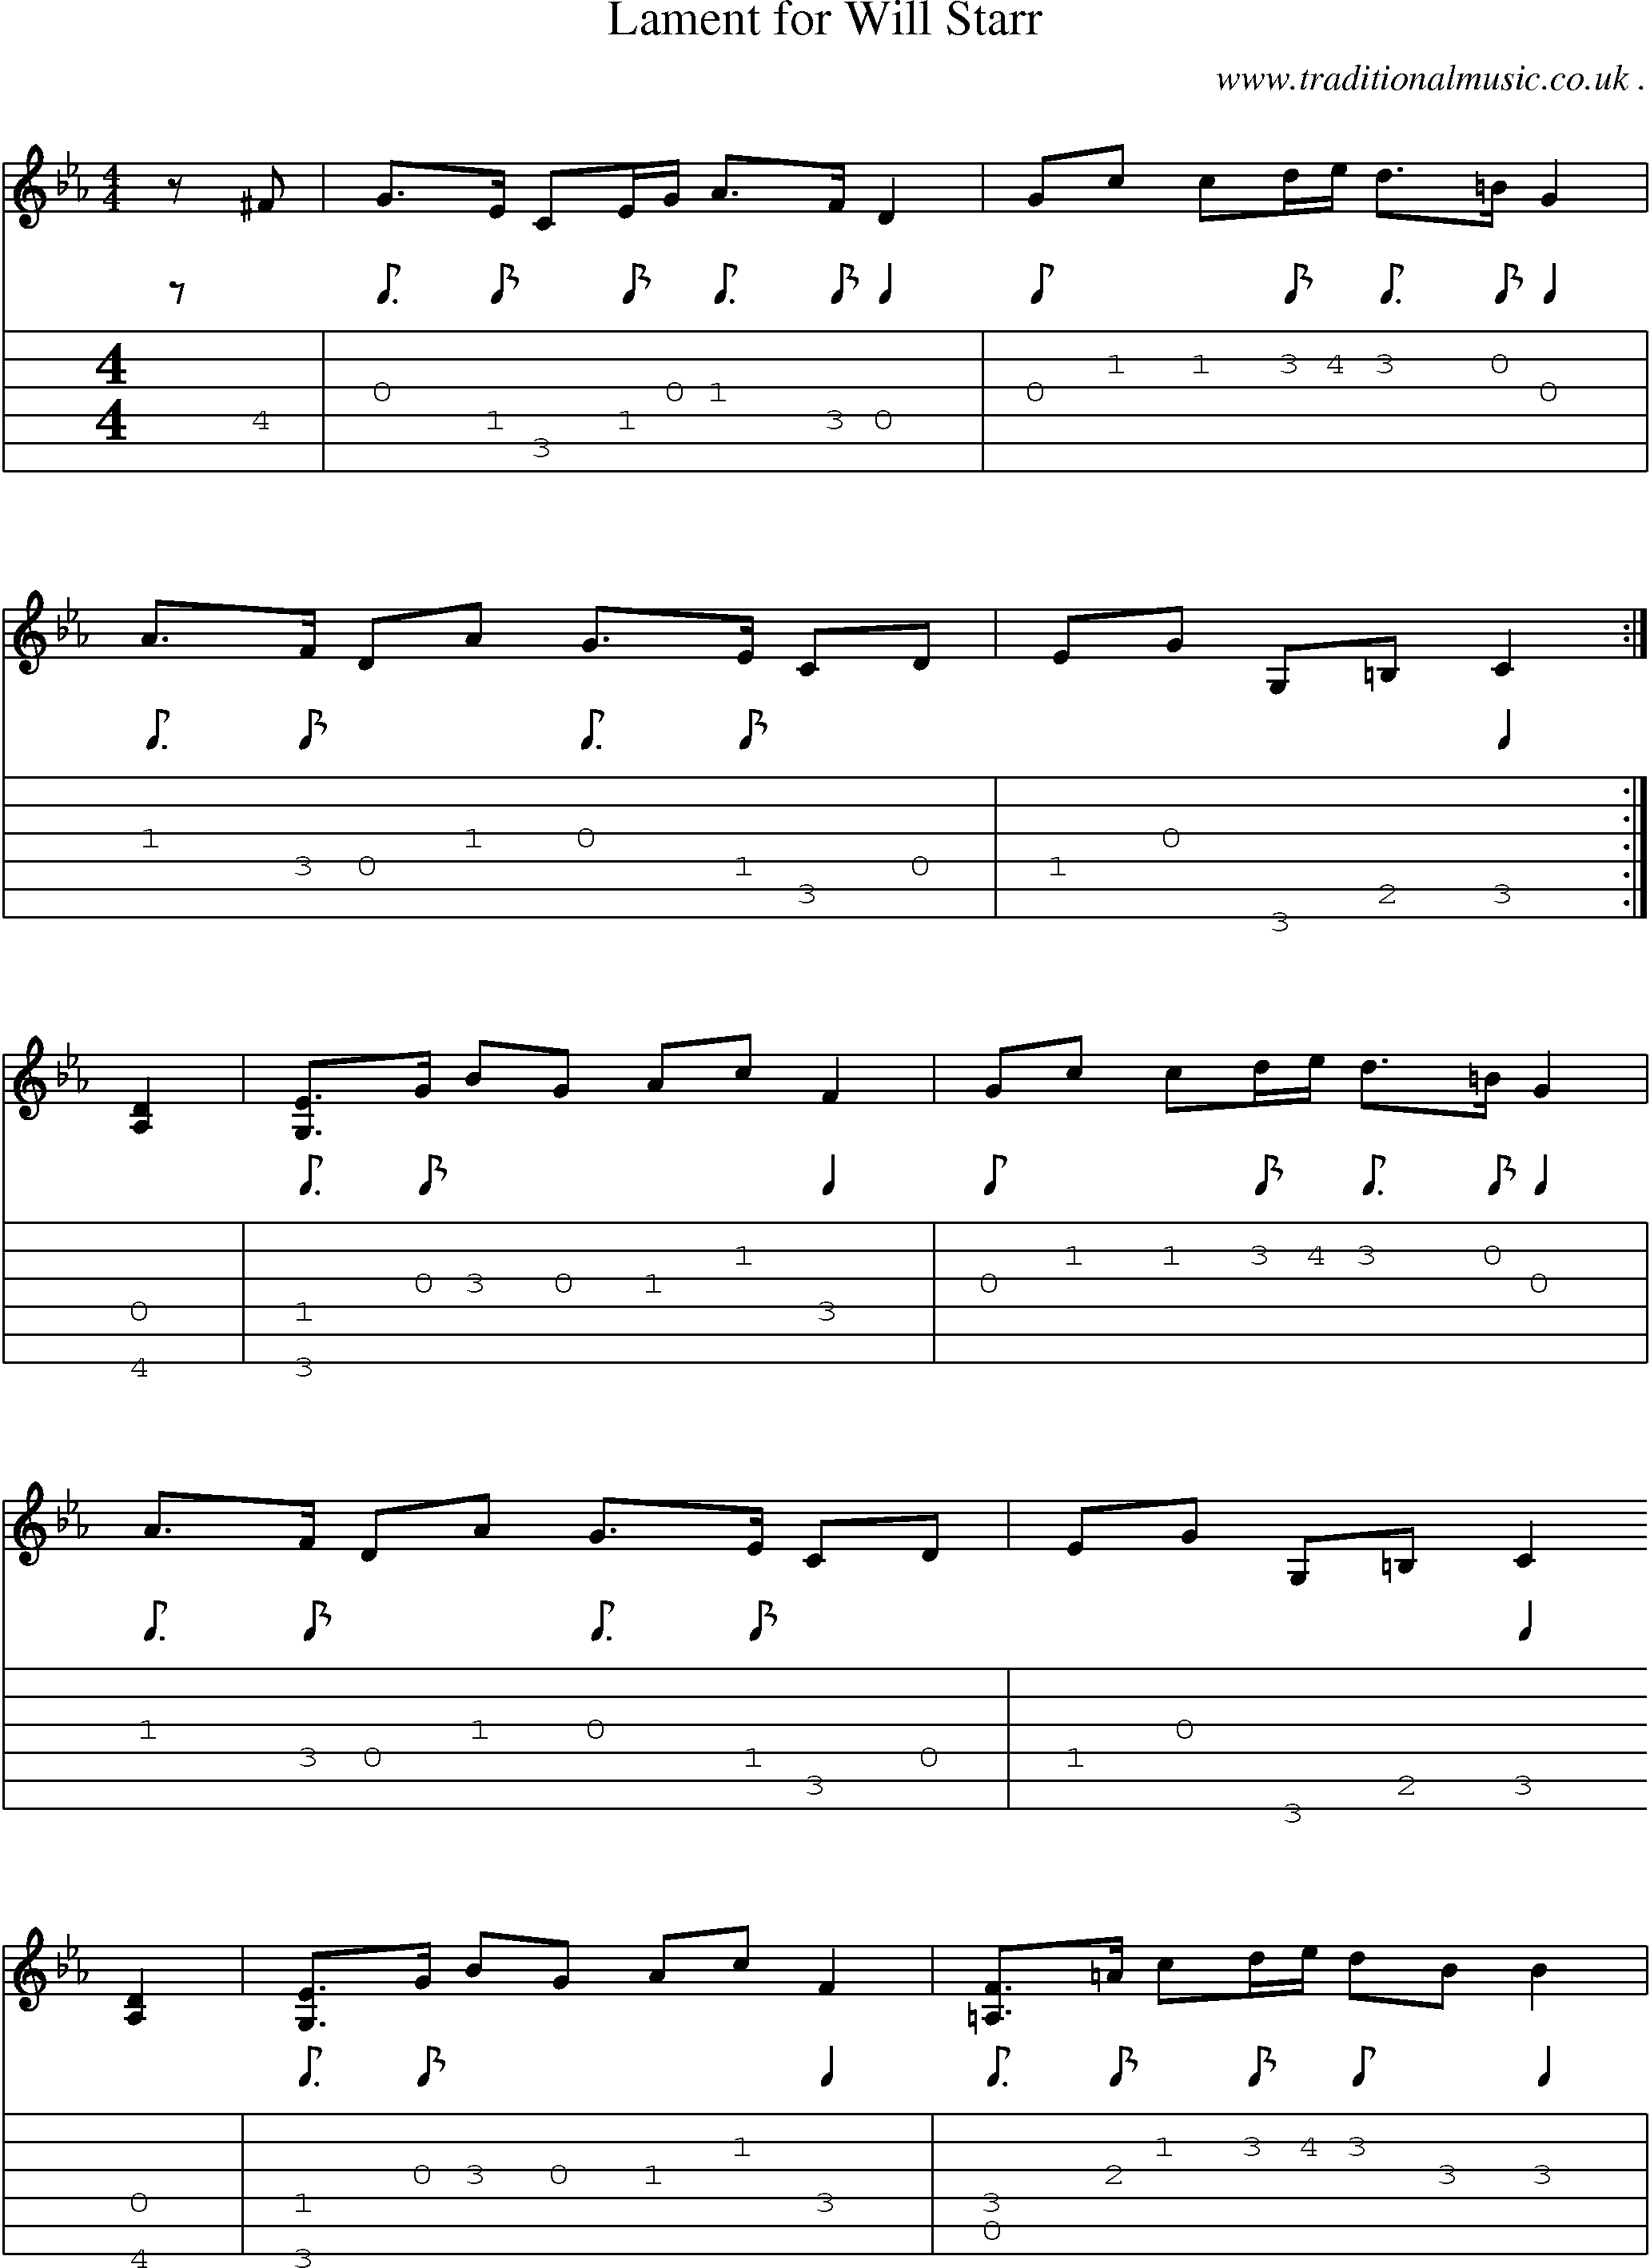 Sheet-music  score, Chords and Guitar Tabs for Lament For Will Starr